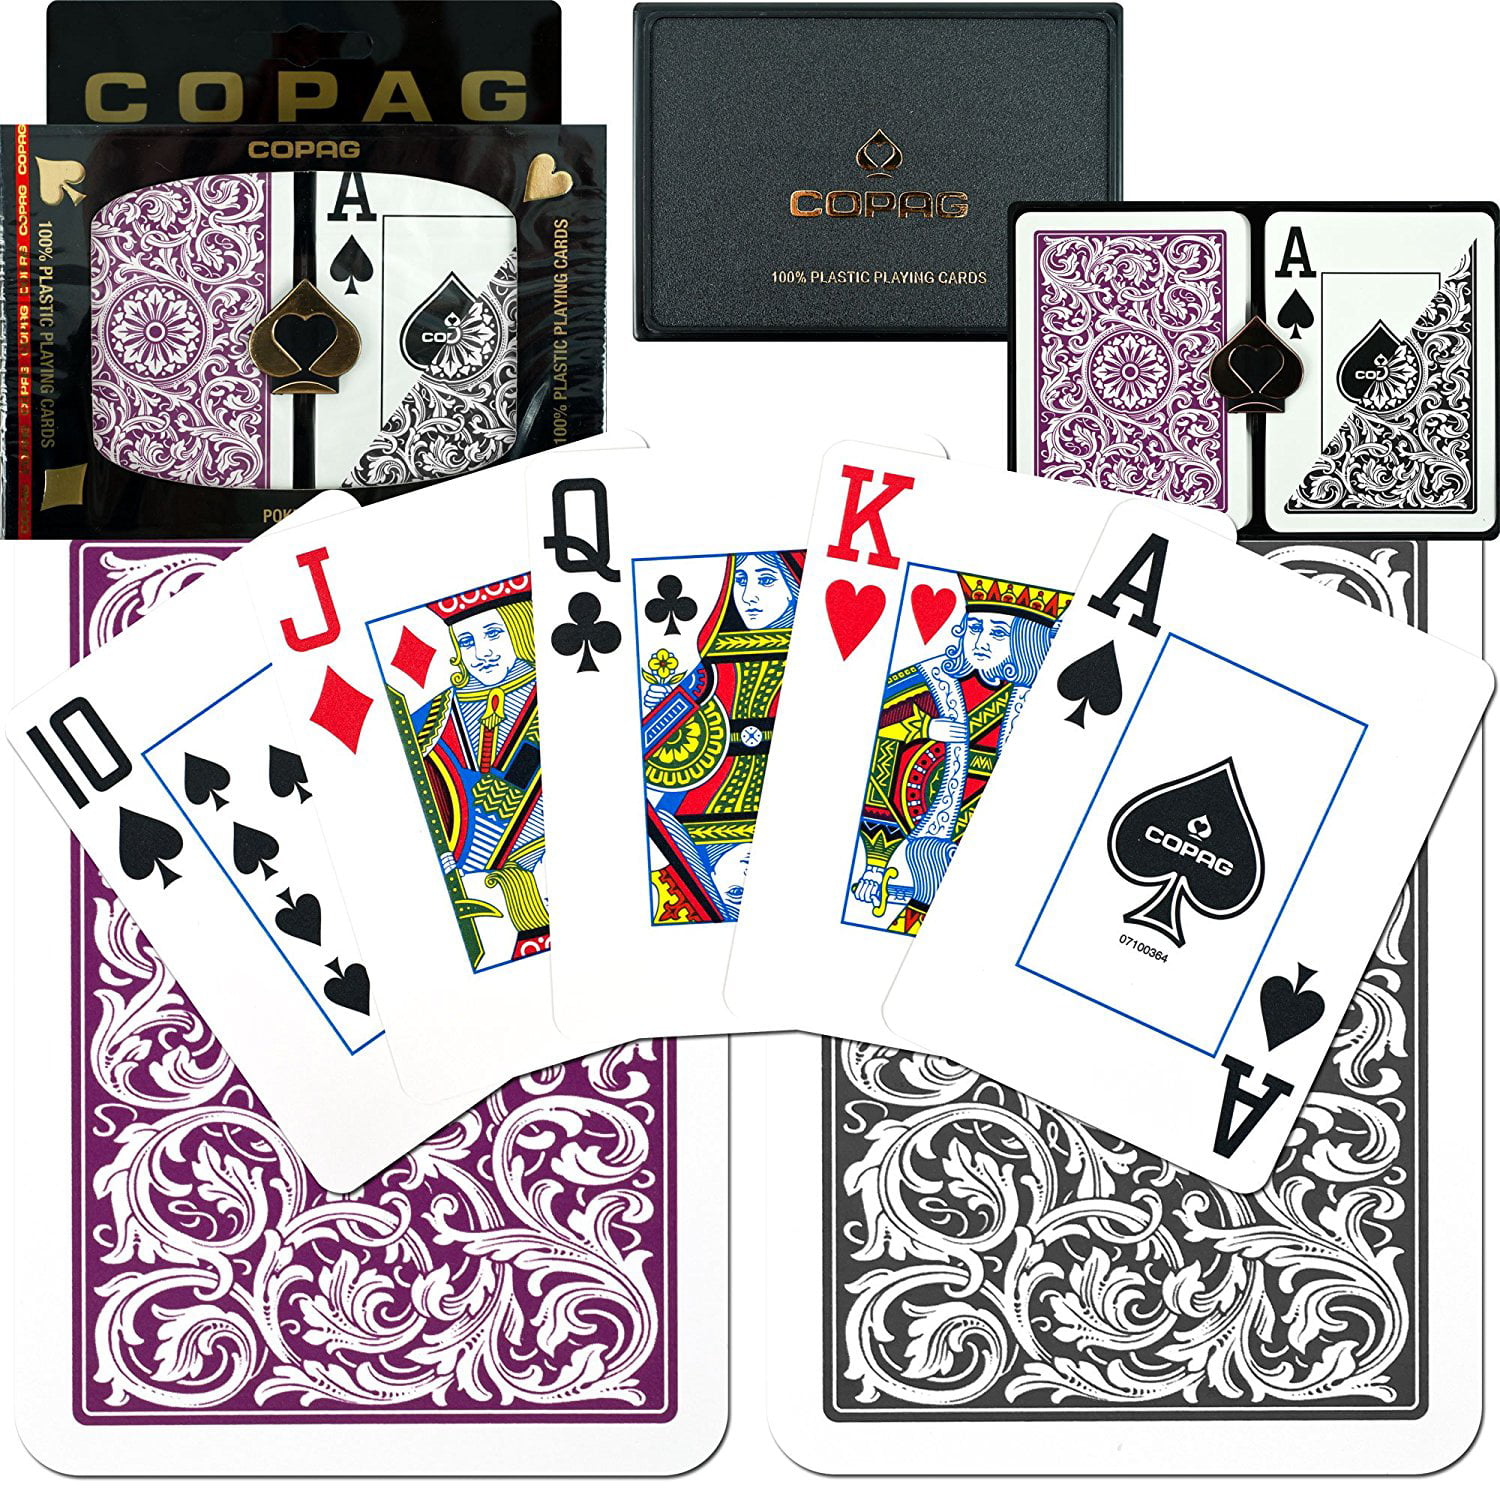 Copag “Unique” Plastic Playing Cards Poker Size Jumbo Index Purple/Grey Double-D 